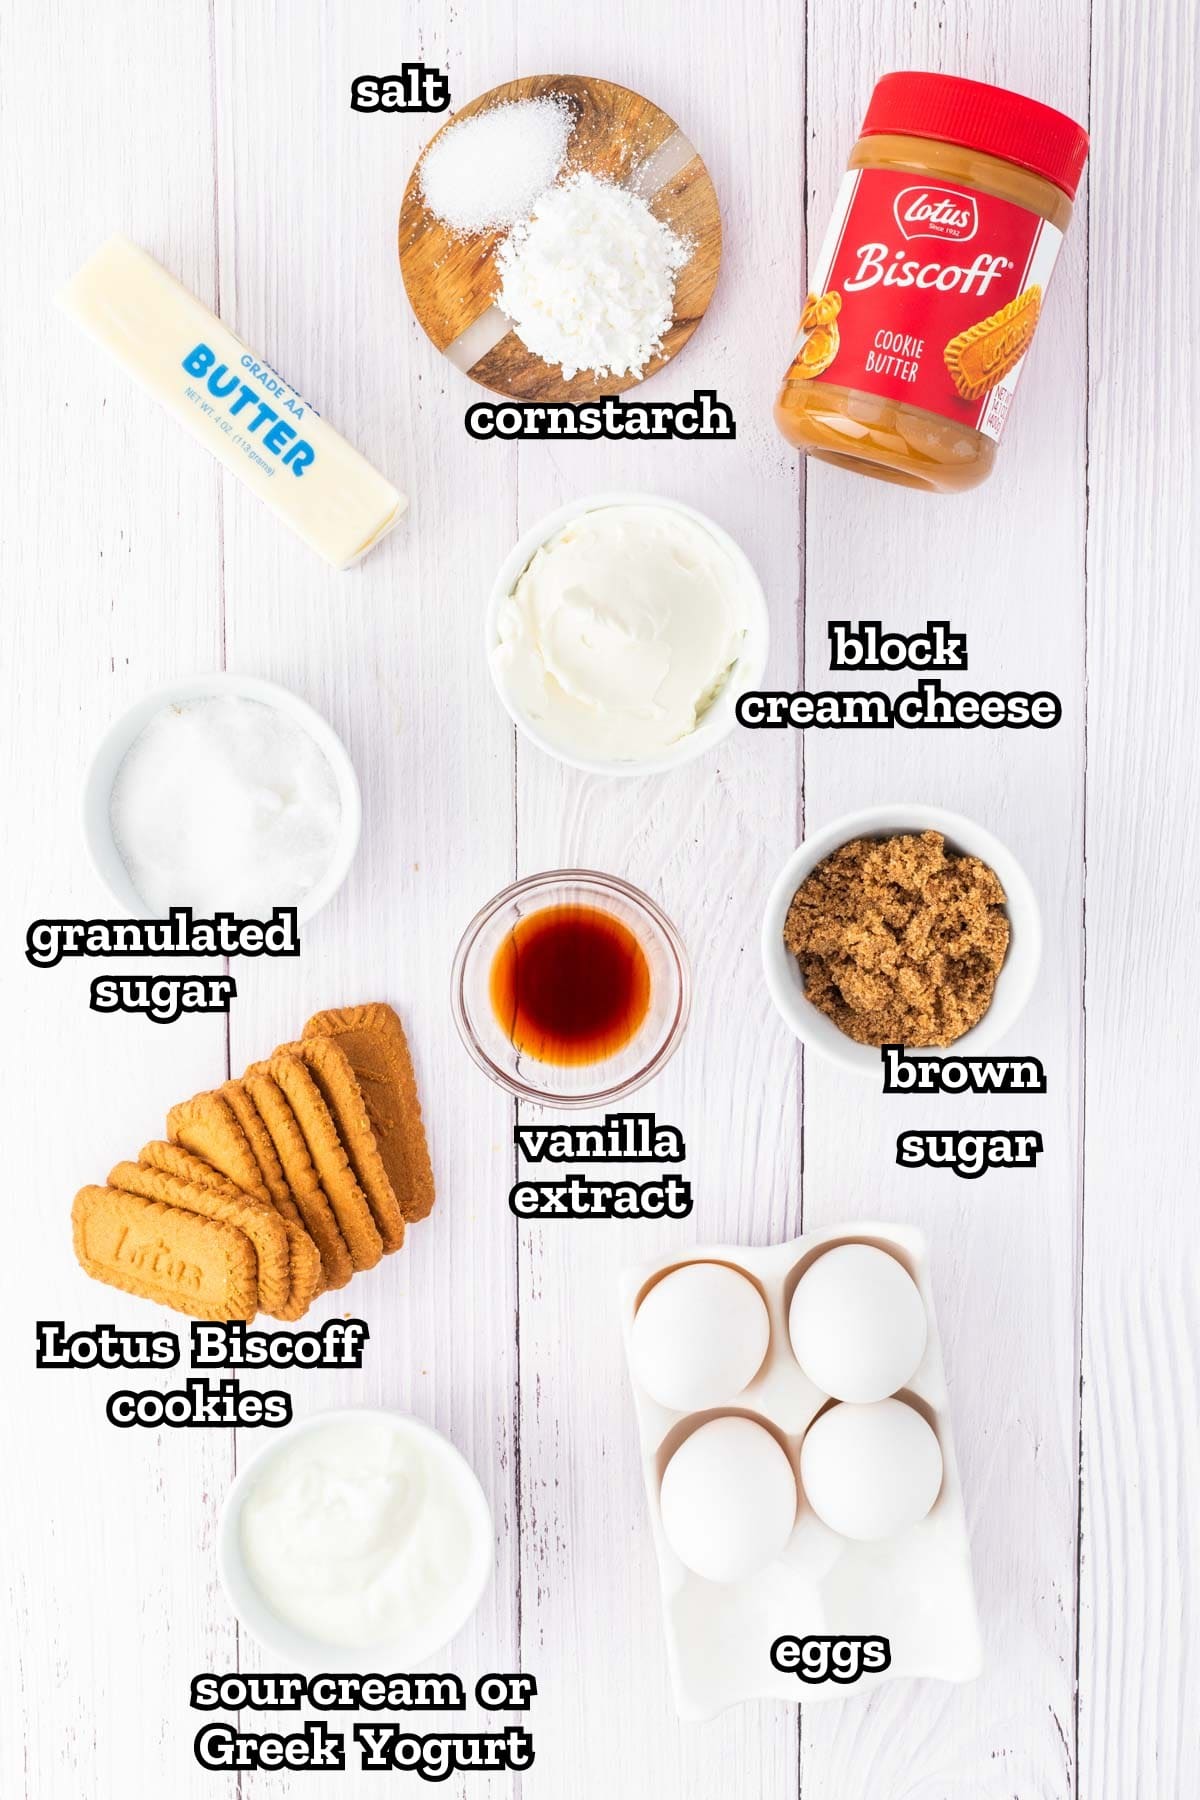 Biscoff cheesecake recipe labeled ingredients.